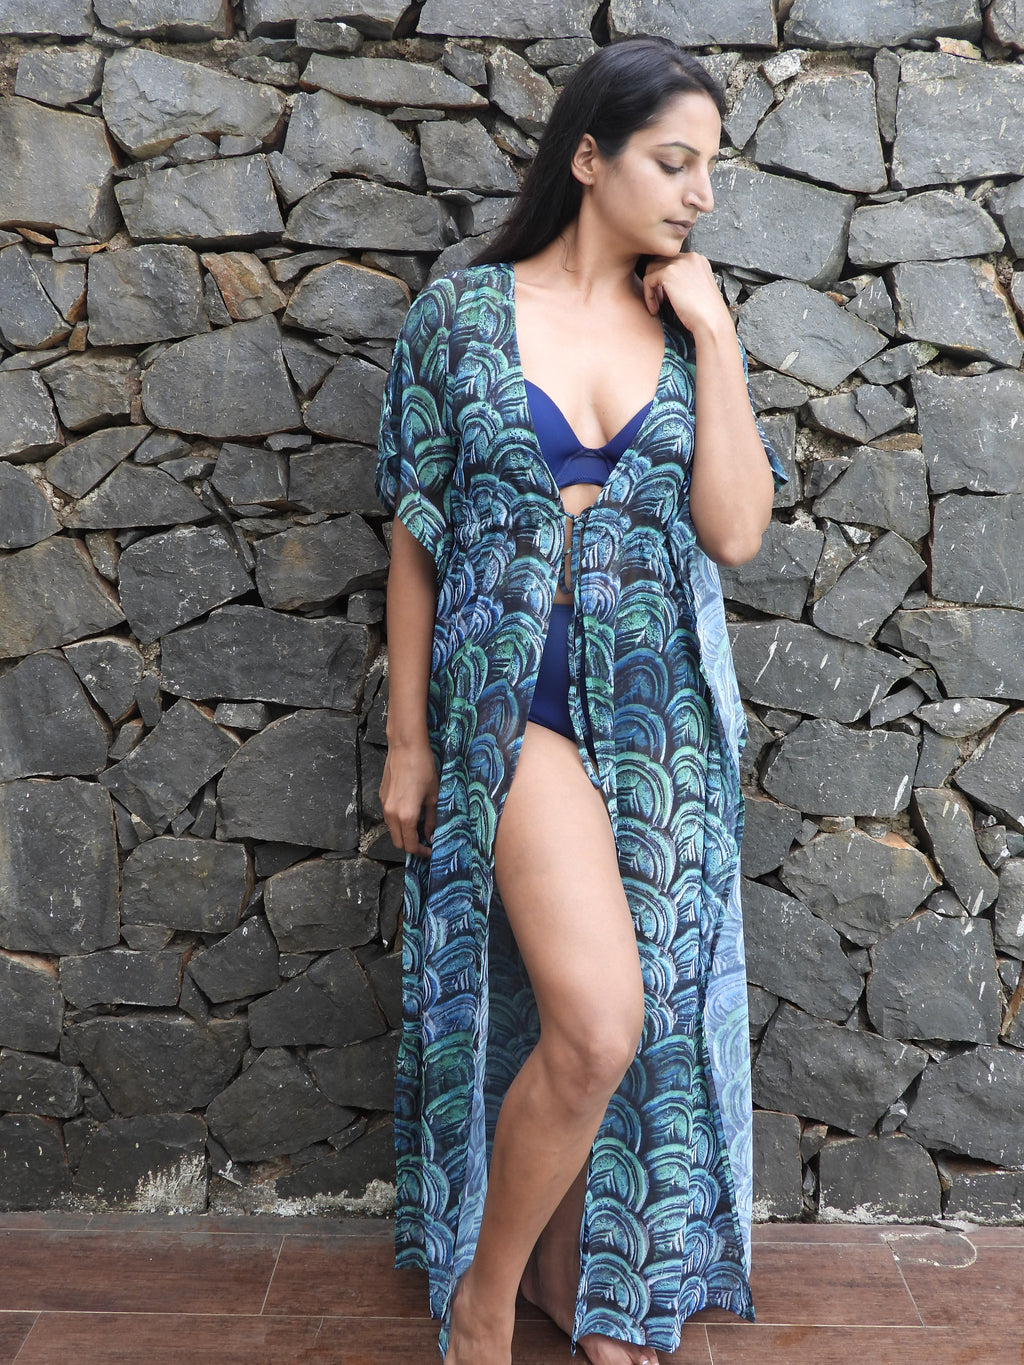 Esha Lal Beachwear Cheap Clothes Discount Fashion online india the beach company harshad daswani Beachwear party wear pool party beach side shop online India the beach company women dresses cute travel trip clothes cod free delivery discount front maxi long kimono 